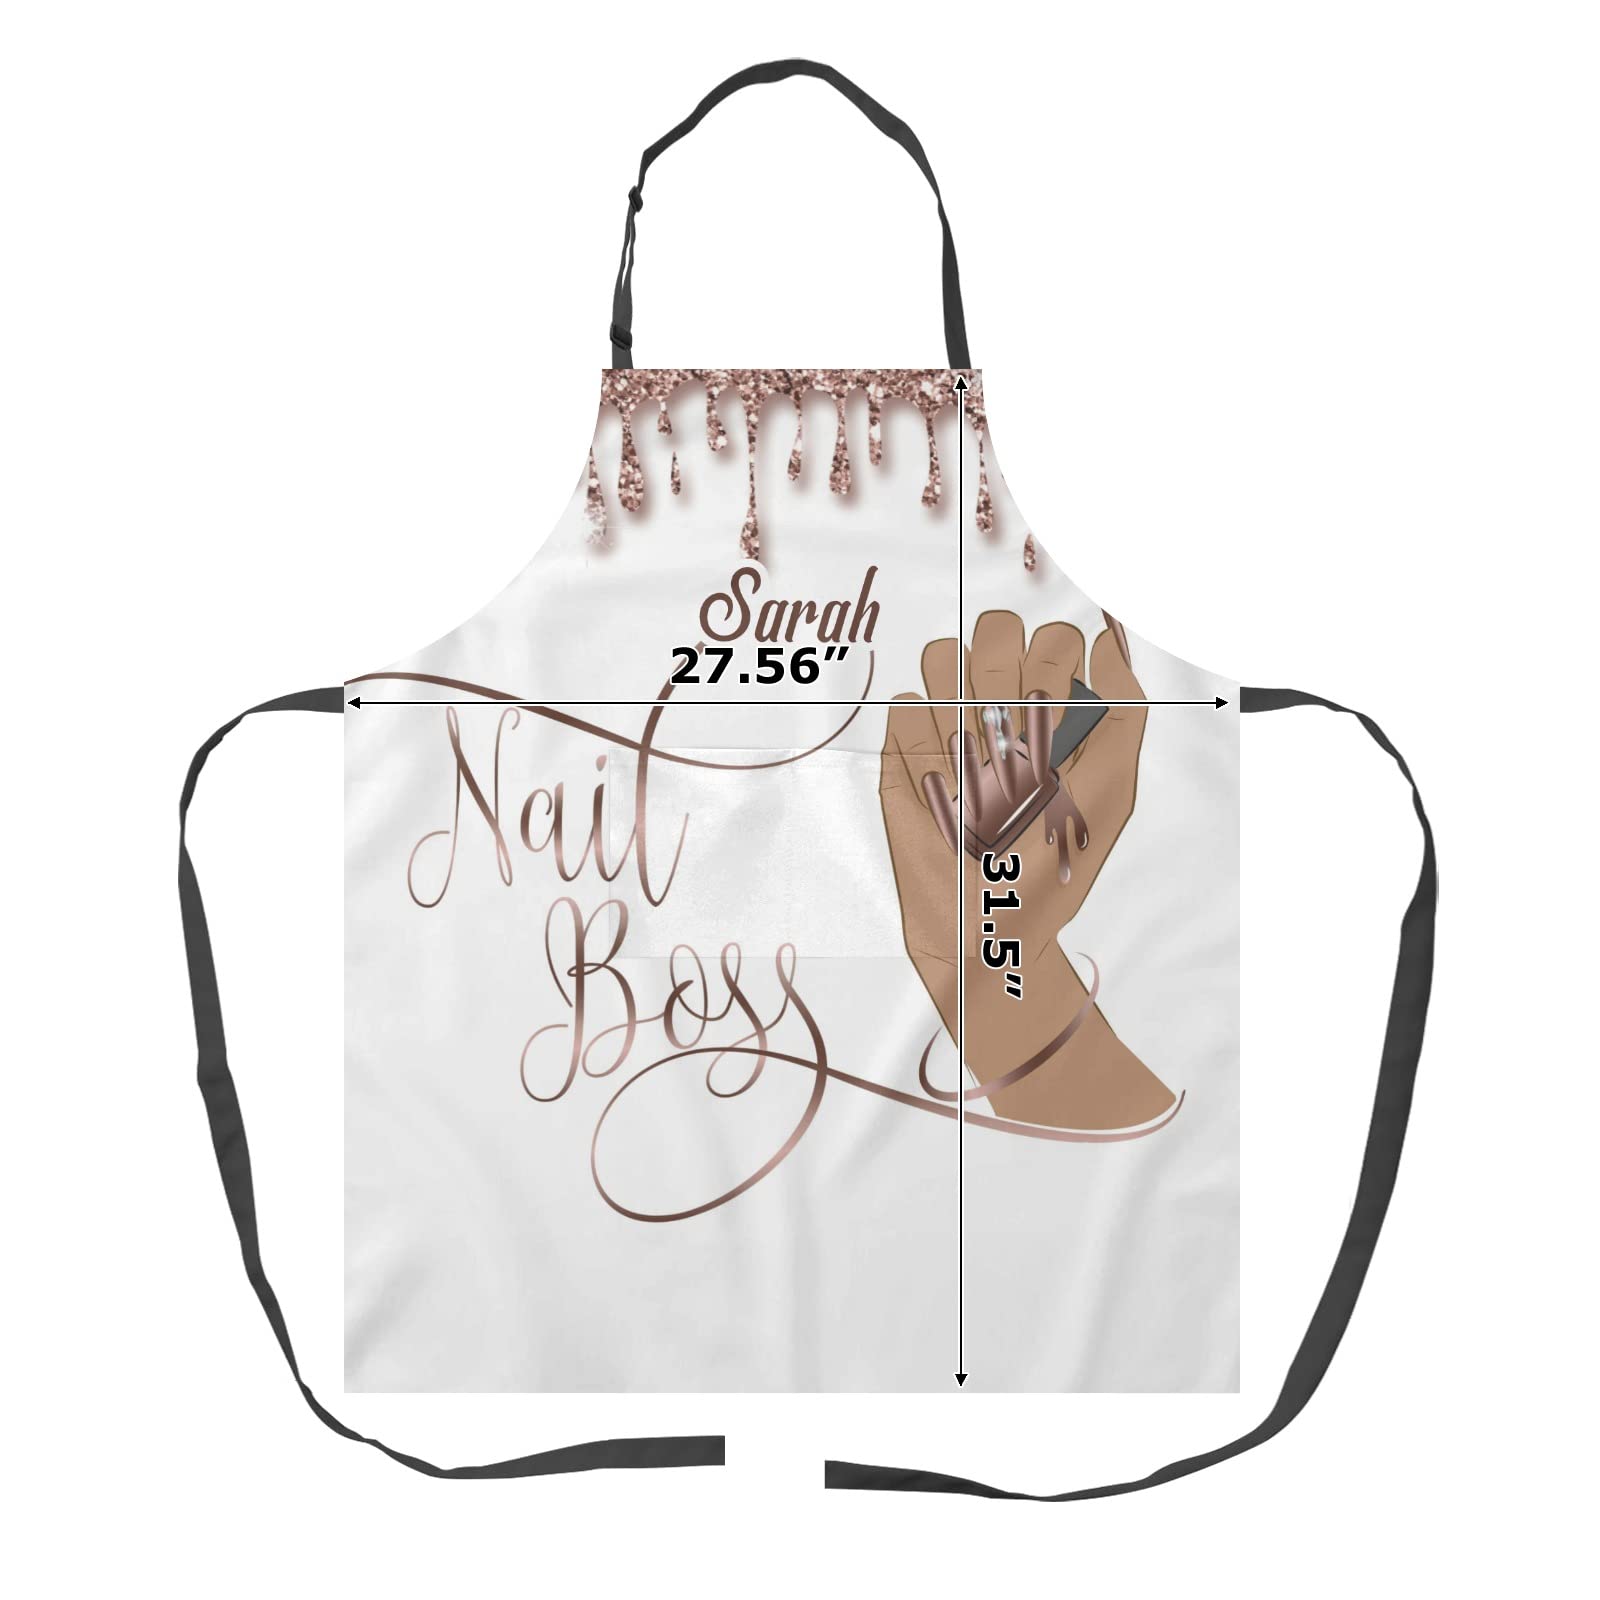 MakeUnique Nail Boss ApronPersonalized Aprons for Women Men Kitchen Cooking Baking Housework Hairstylist Barber Chef Apron with Pockets